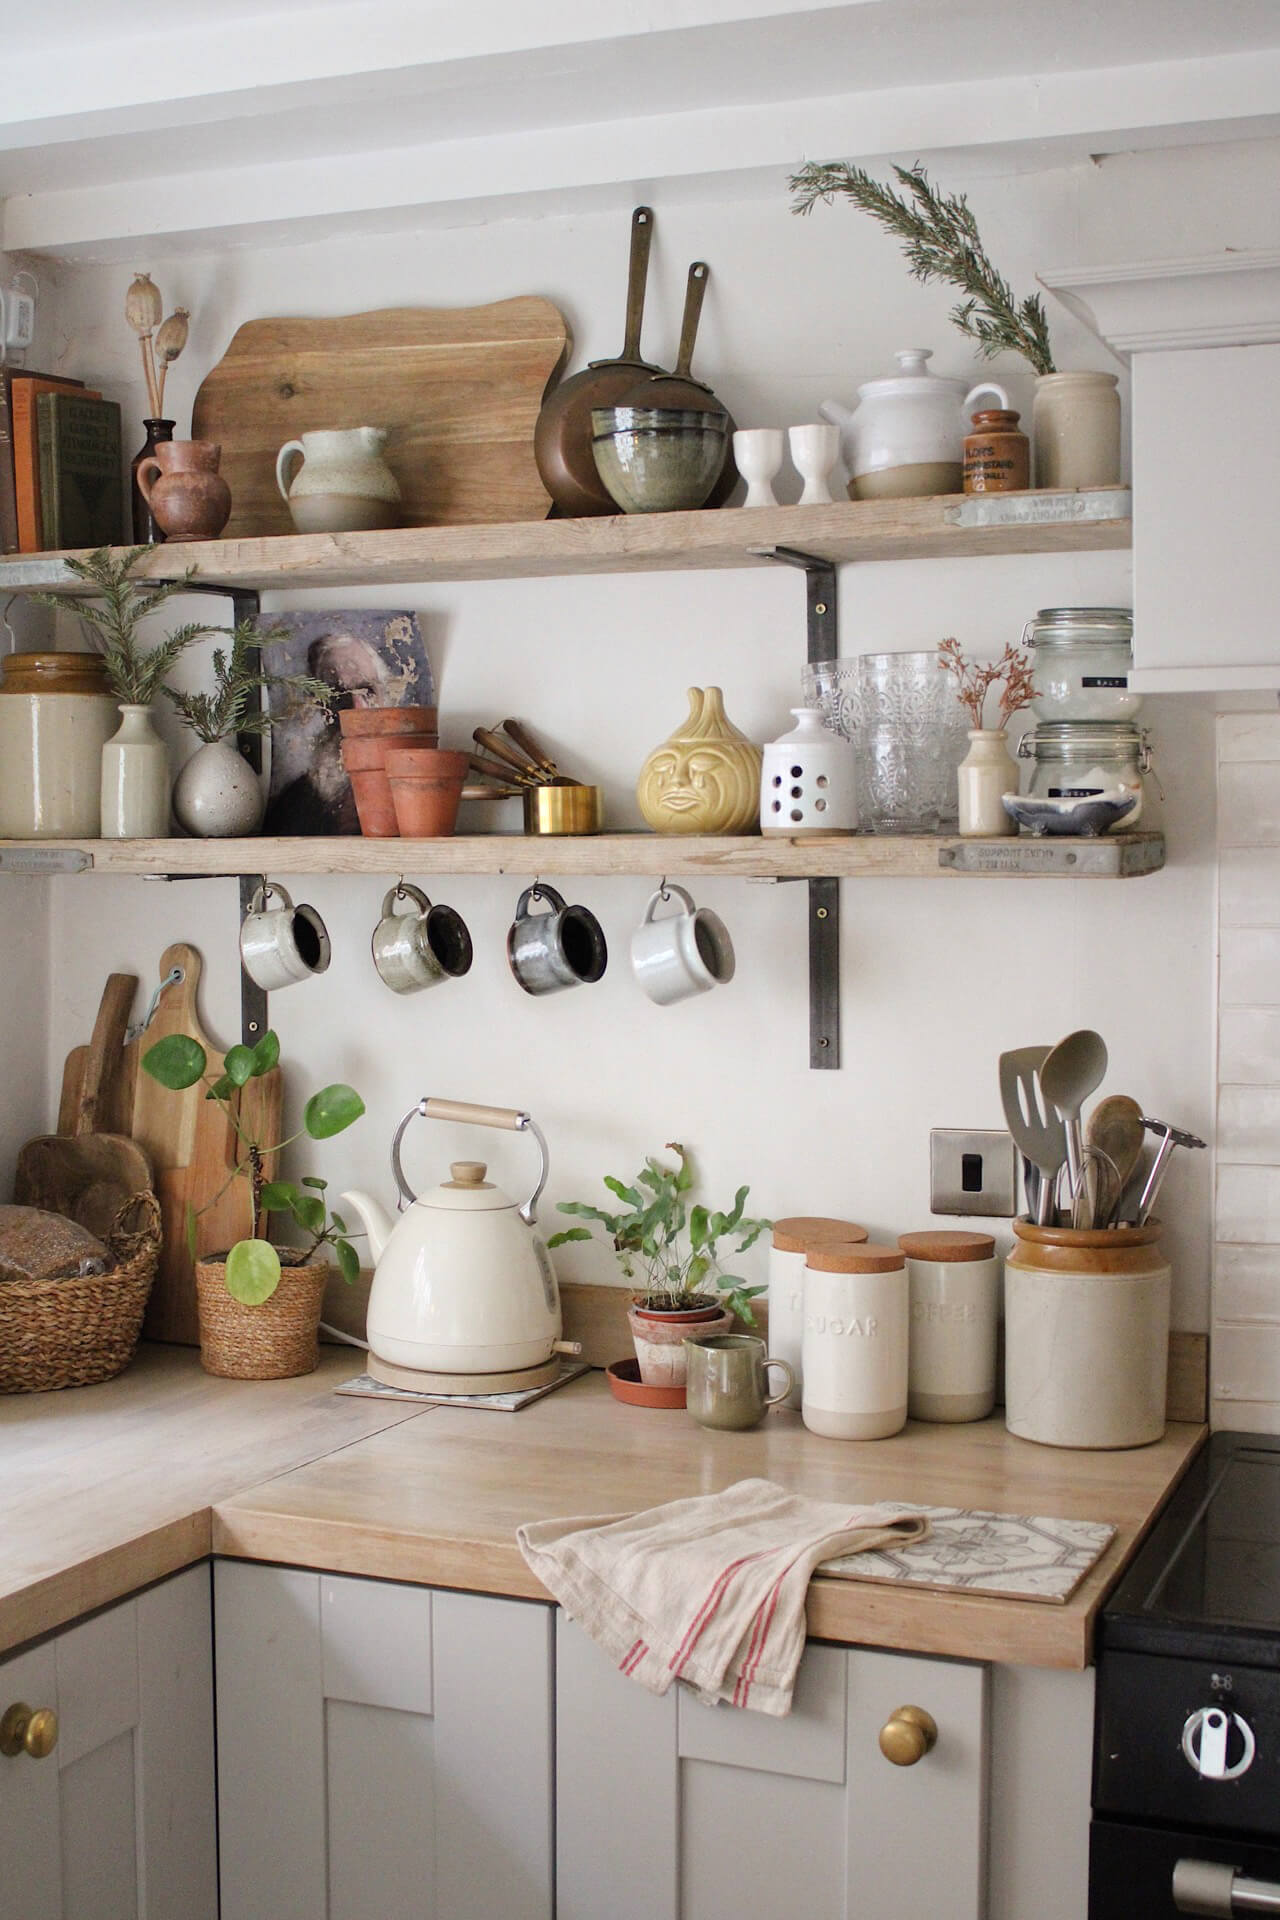 Home tour with Rachel Ashfield of @the_old_cottage - a corner of the kitchen with reclaimed wooden shelving filled with vintage kitchenalia. 